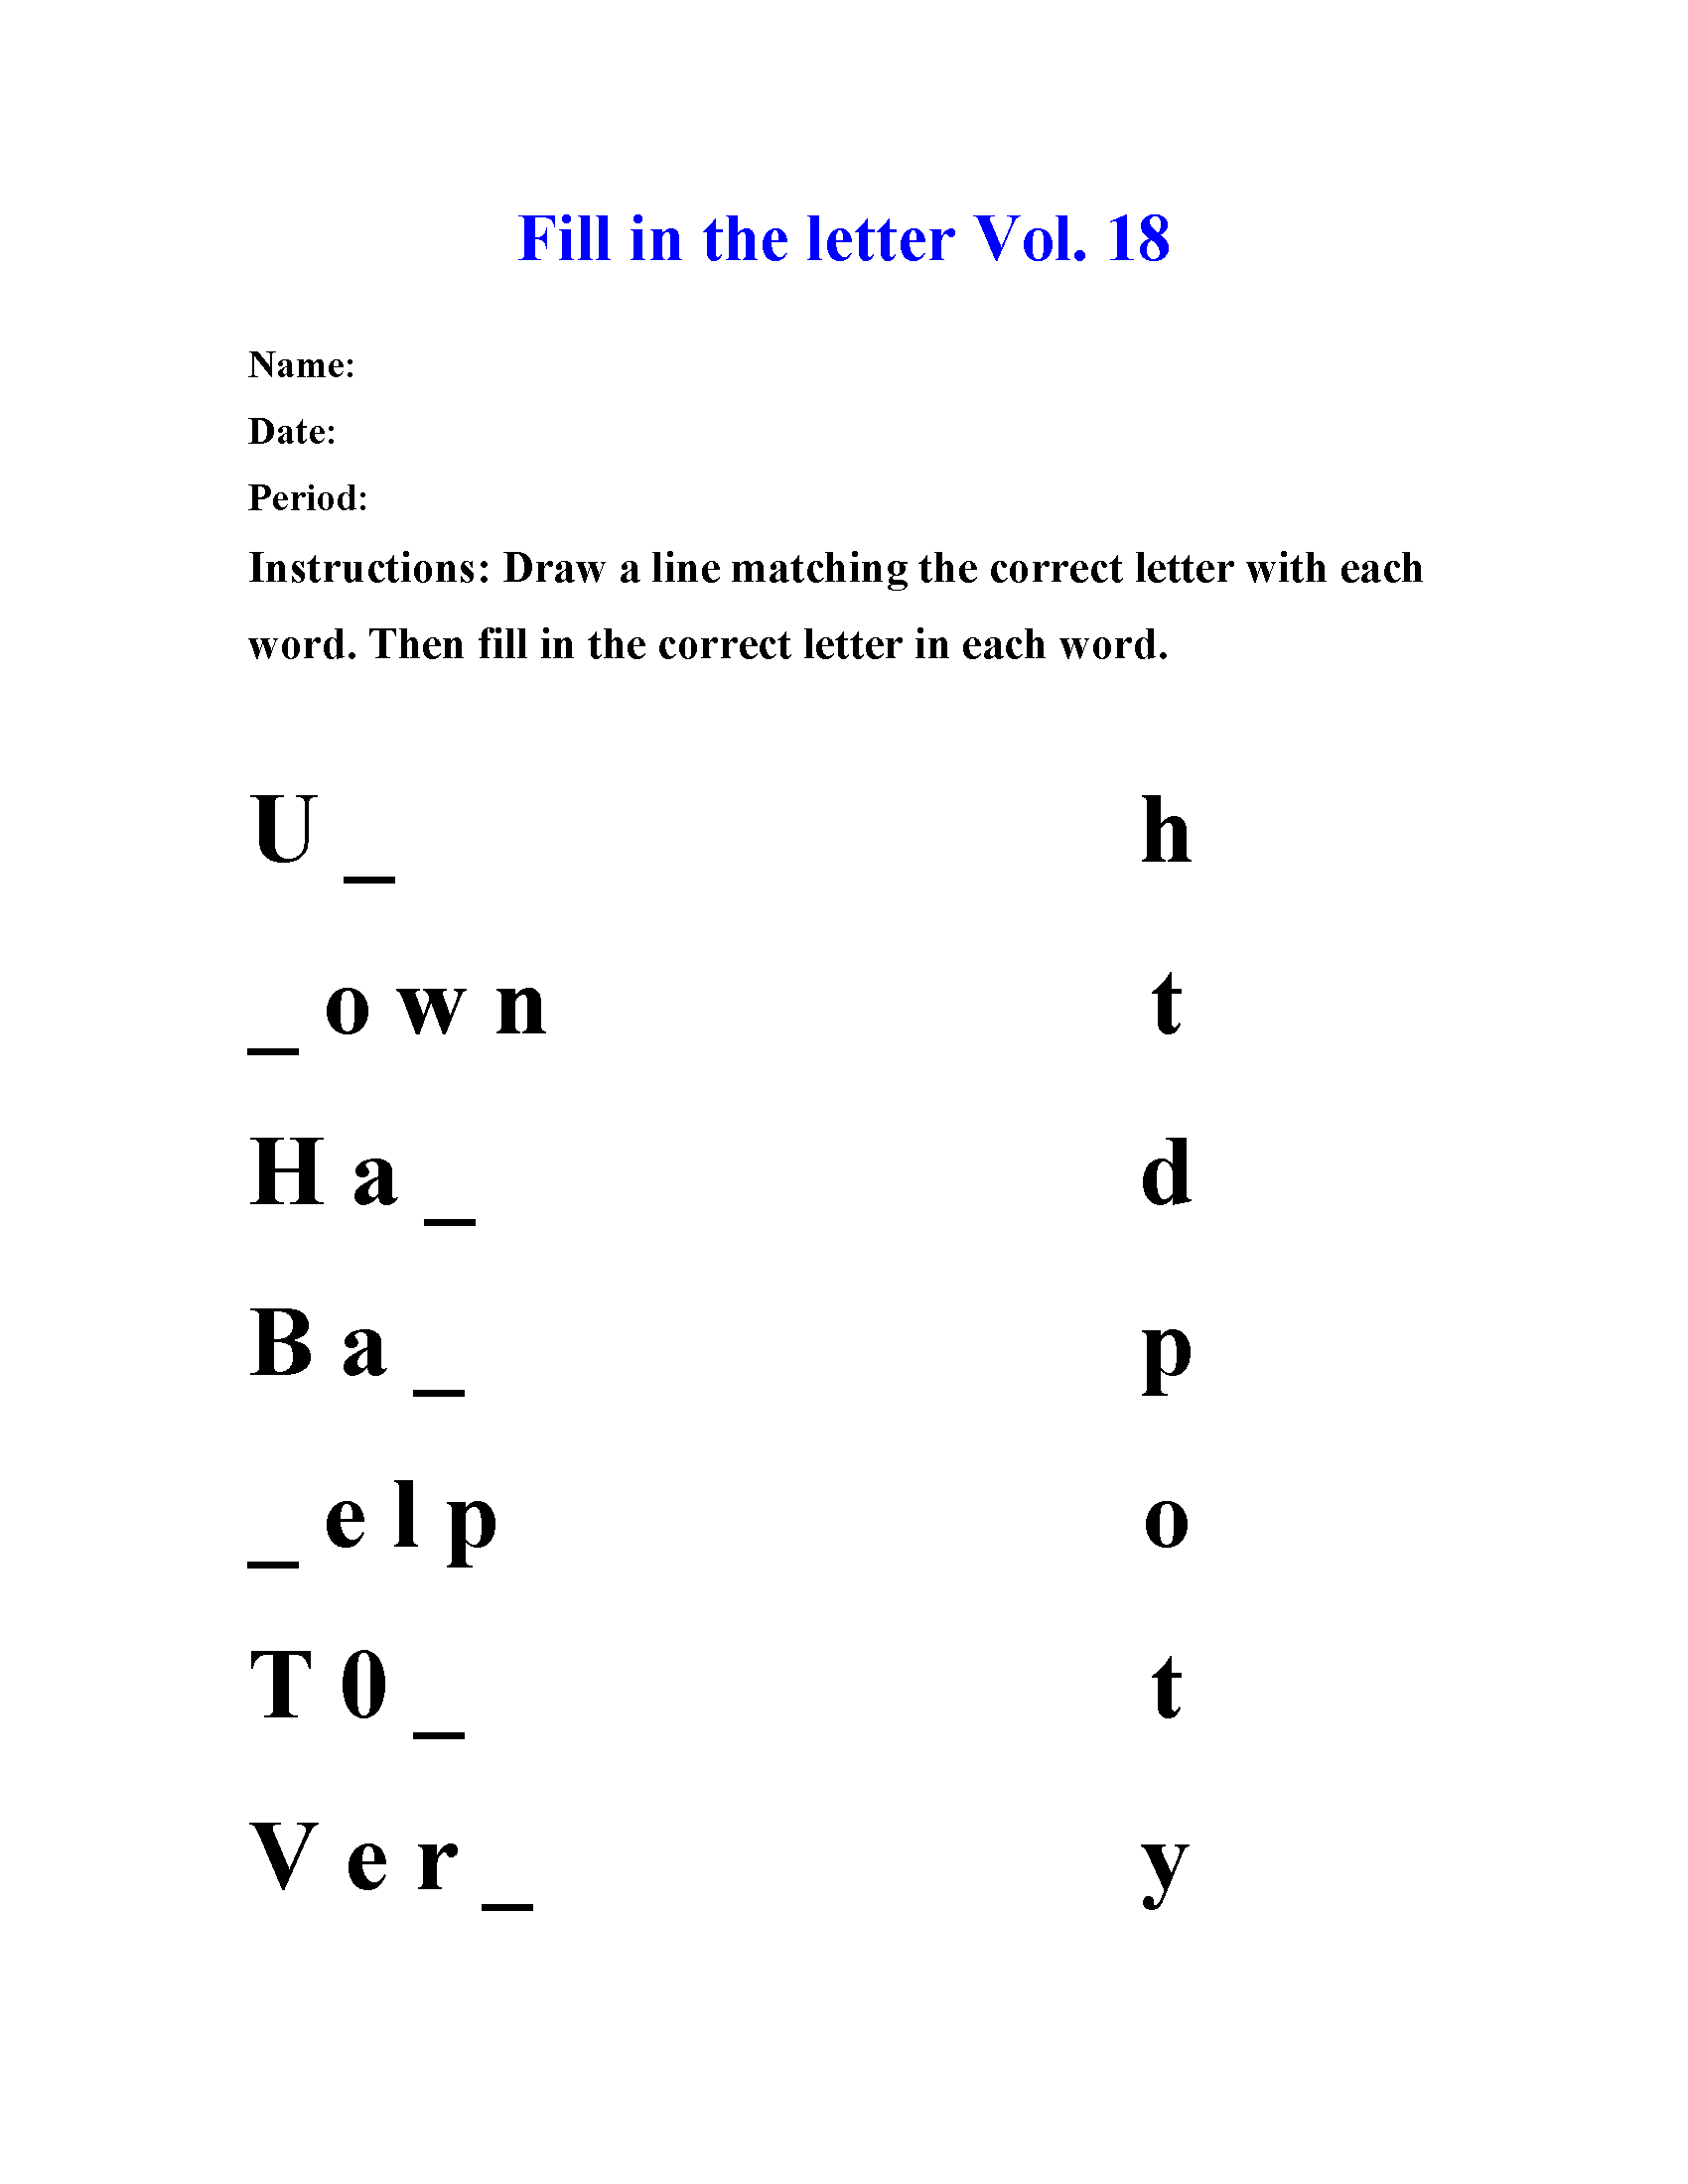 Fill in the letter Vol 18